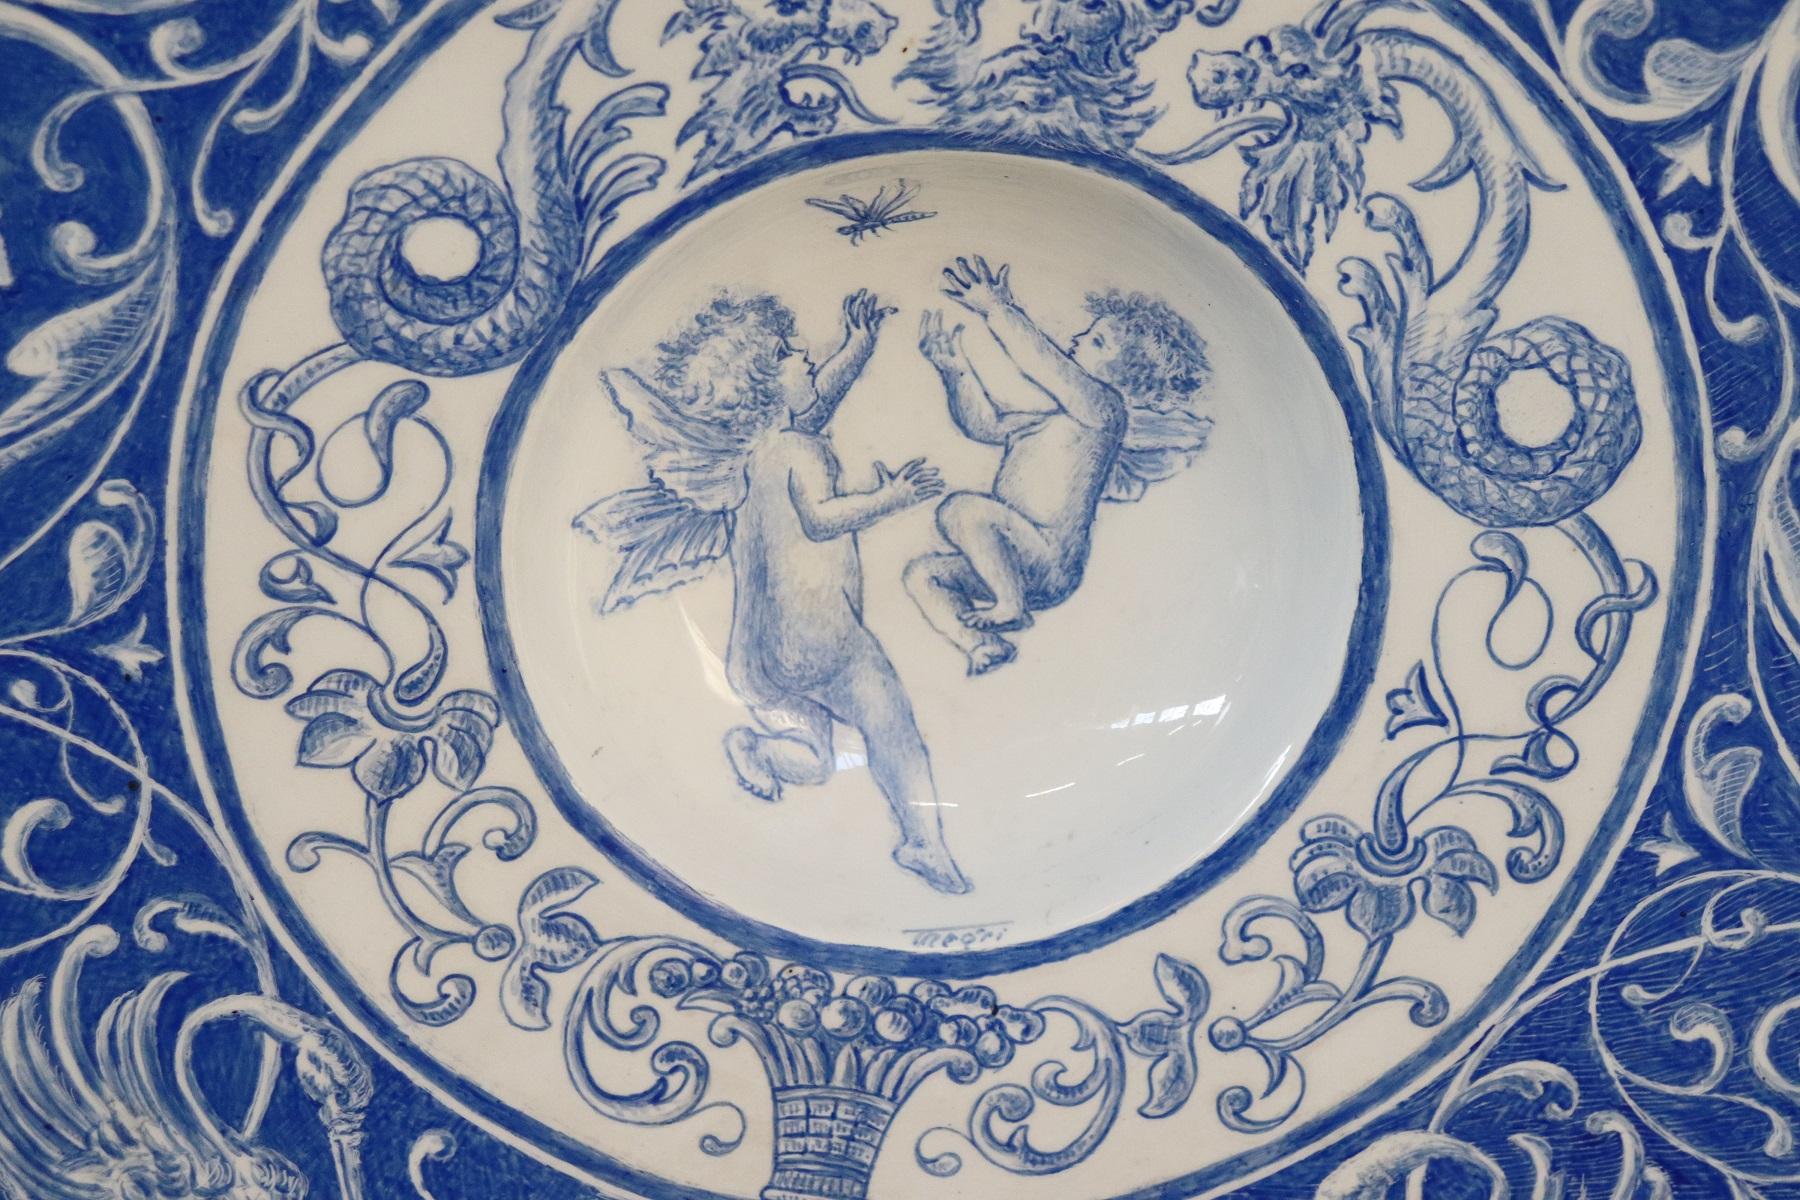 Antique Italian ceramic, 1910s. Rich decoration in shades of blue. The figures are classic in the centre two cherubs. High artistic quality. Brand at the Italian manufacturing base in Laveno. This dish is perfect as a wall decoration or at the